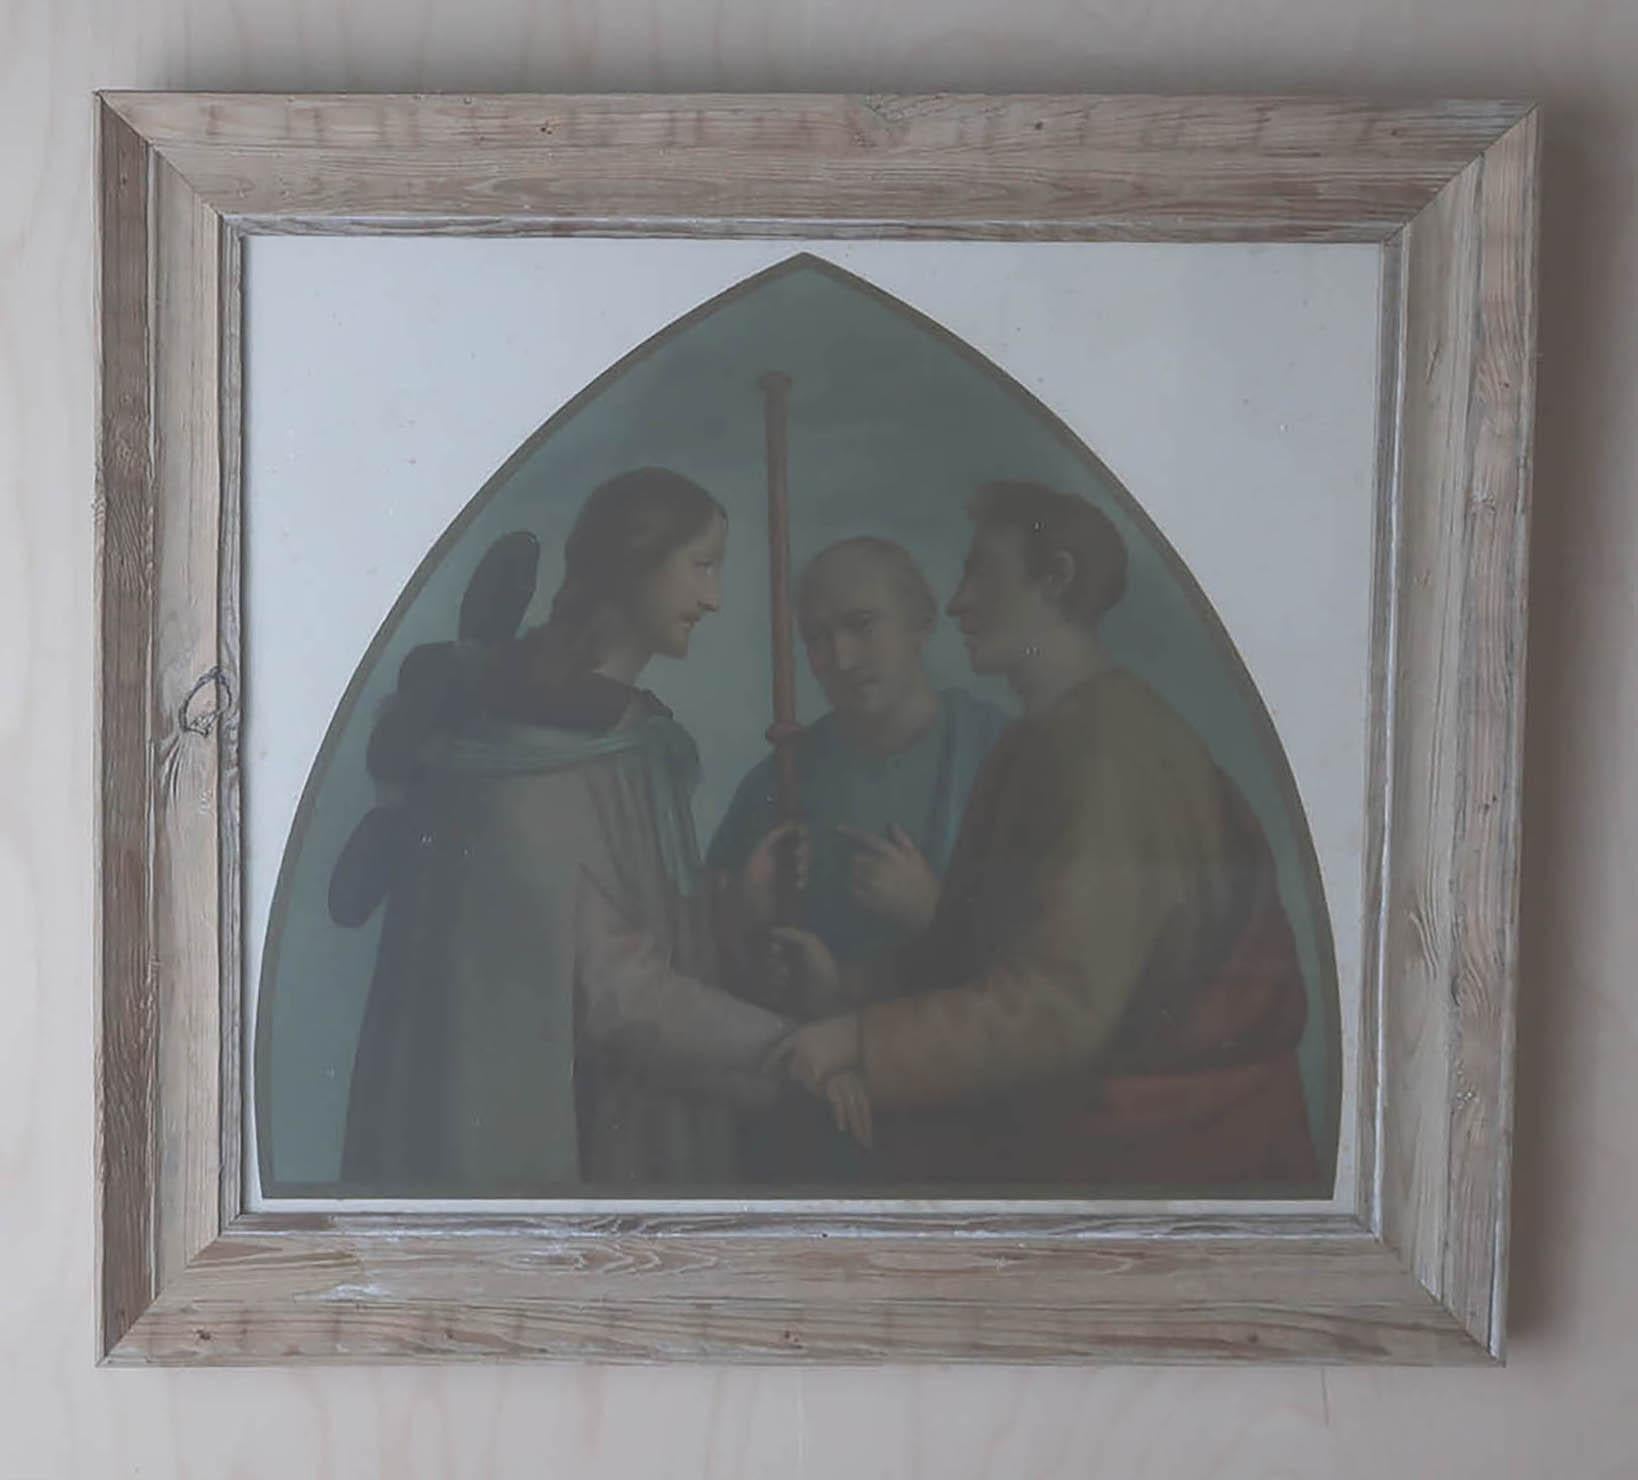 Great image of a Renaissance fresco by Fra Bartolomeo

Chromo-lithograph 

Published, C.1870

Presented in an antique distressed pine frame





